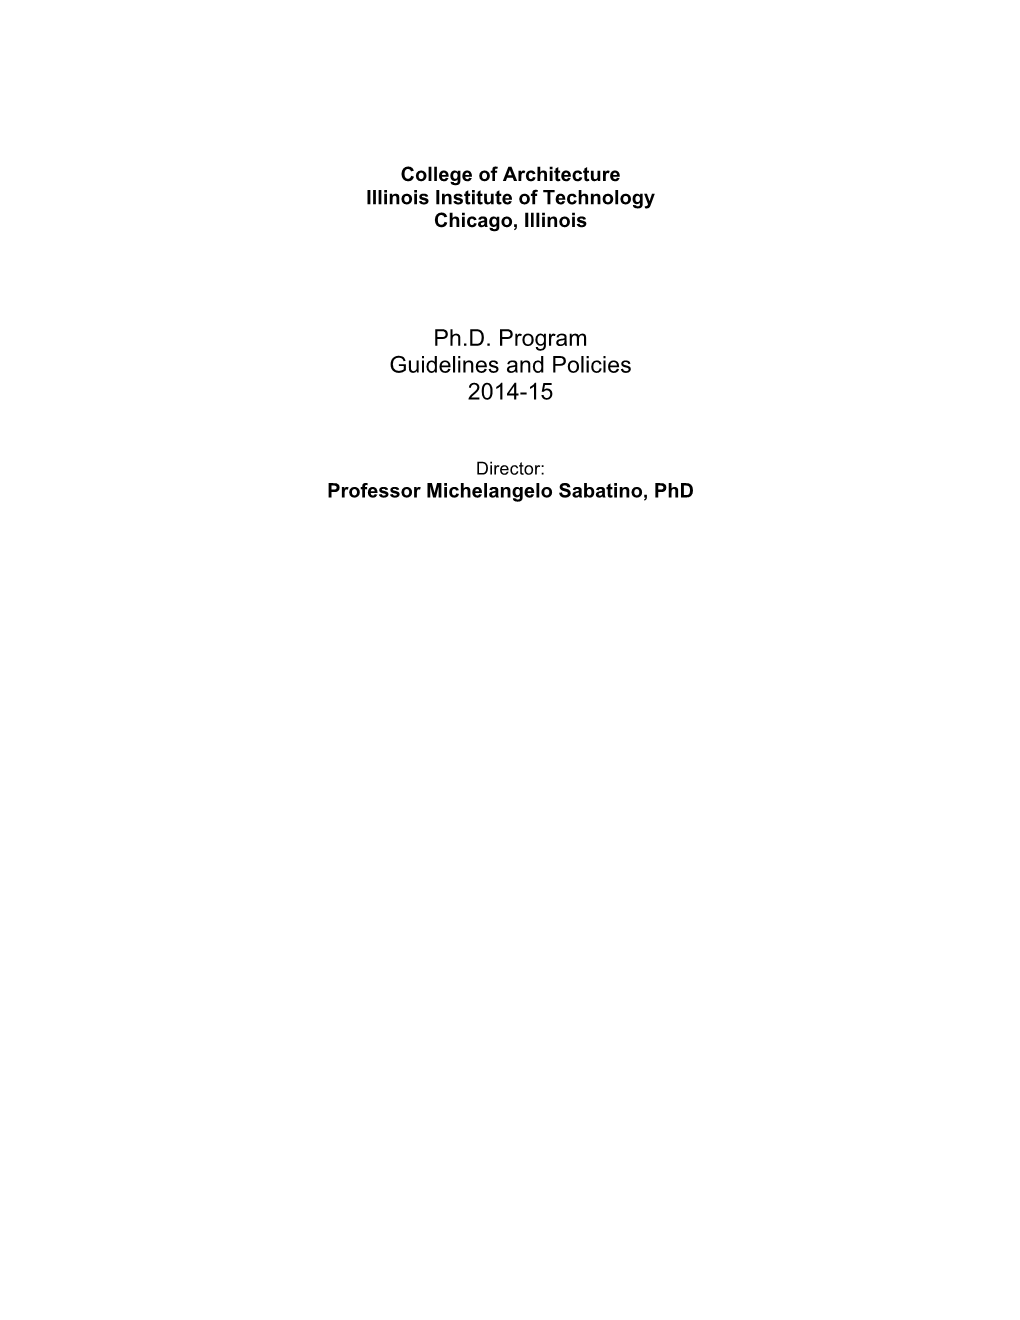 NEW 2014-15 Phd Guidelines